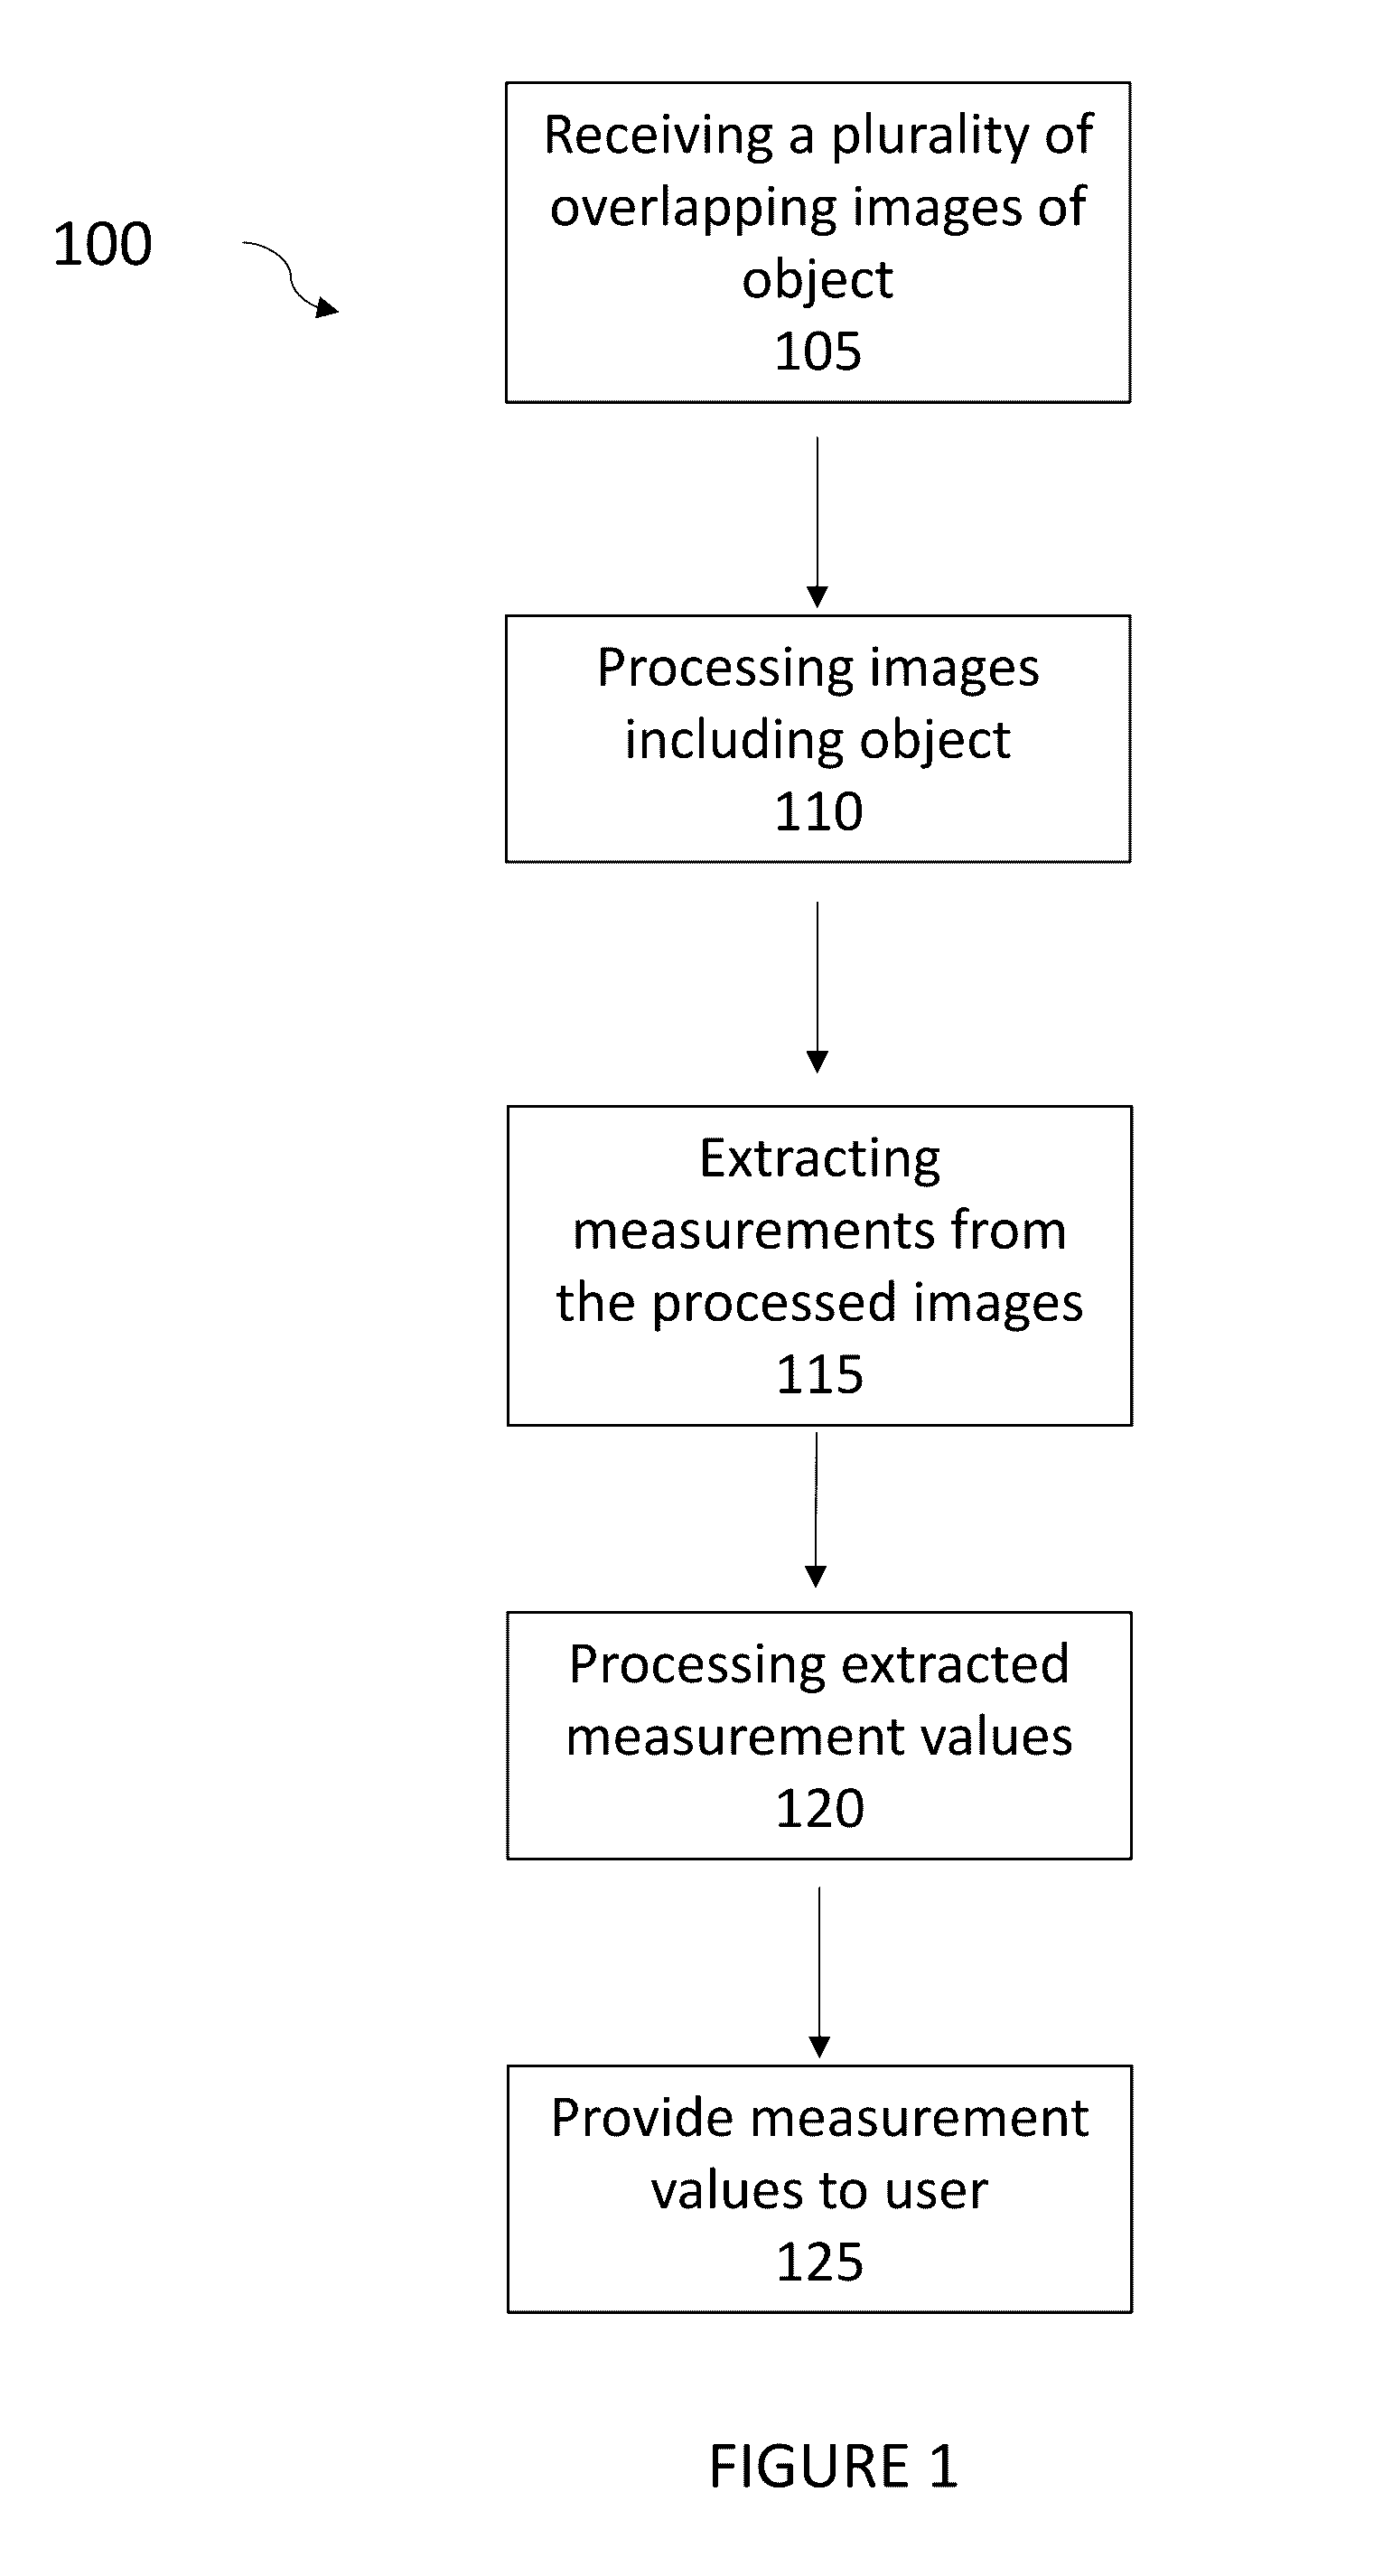 Surveying and measurement methods and devices